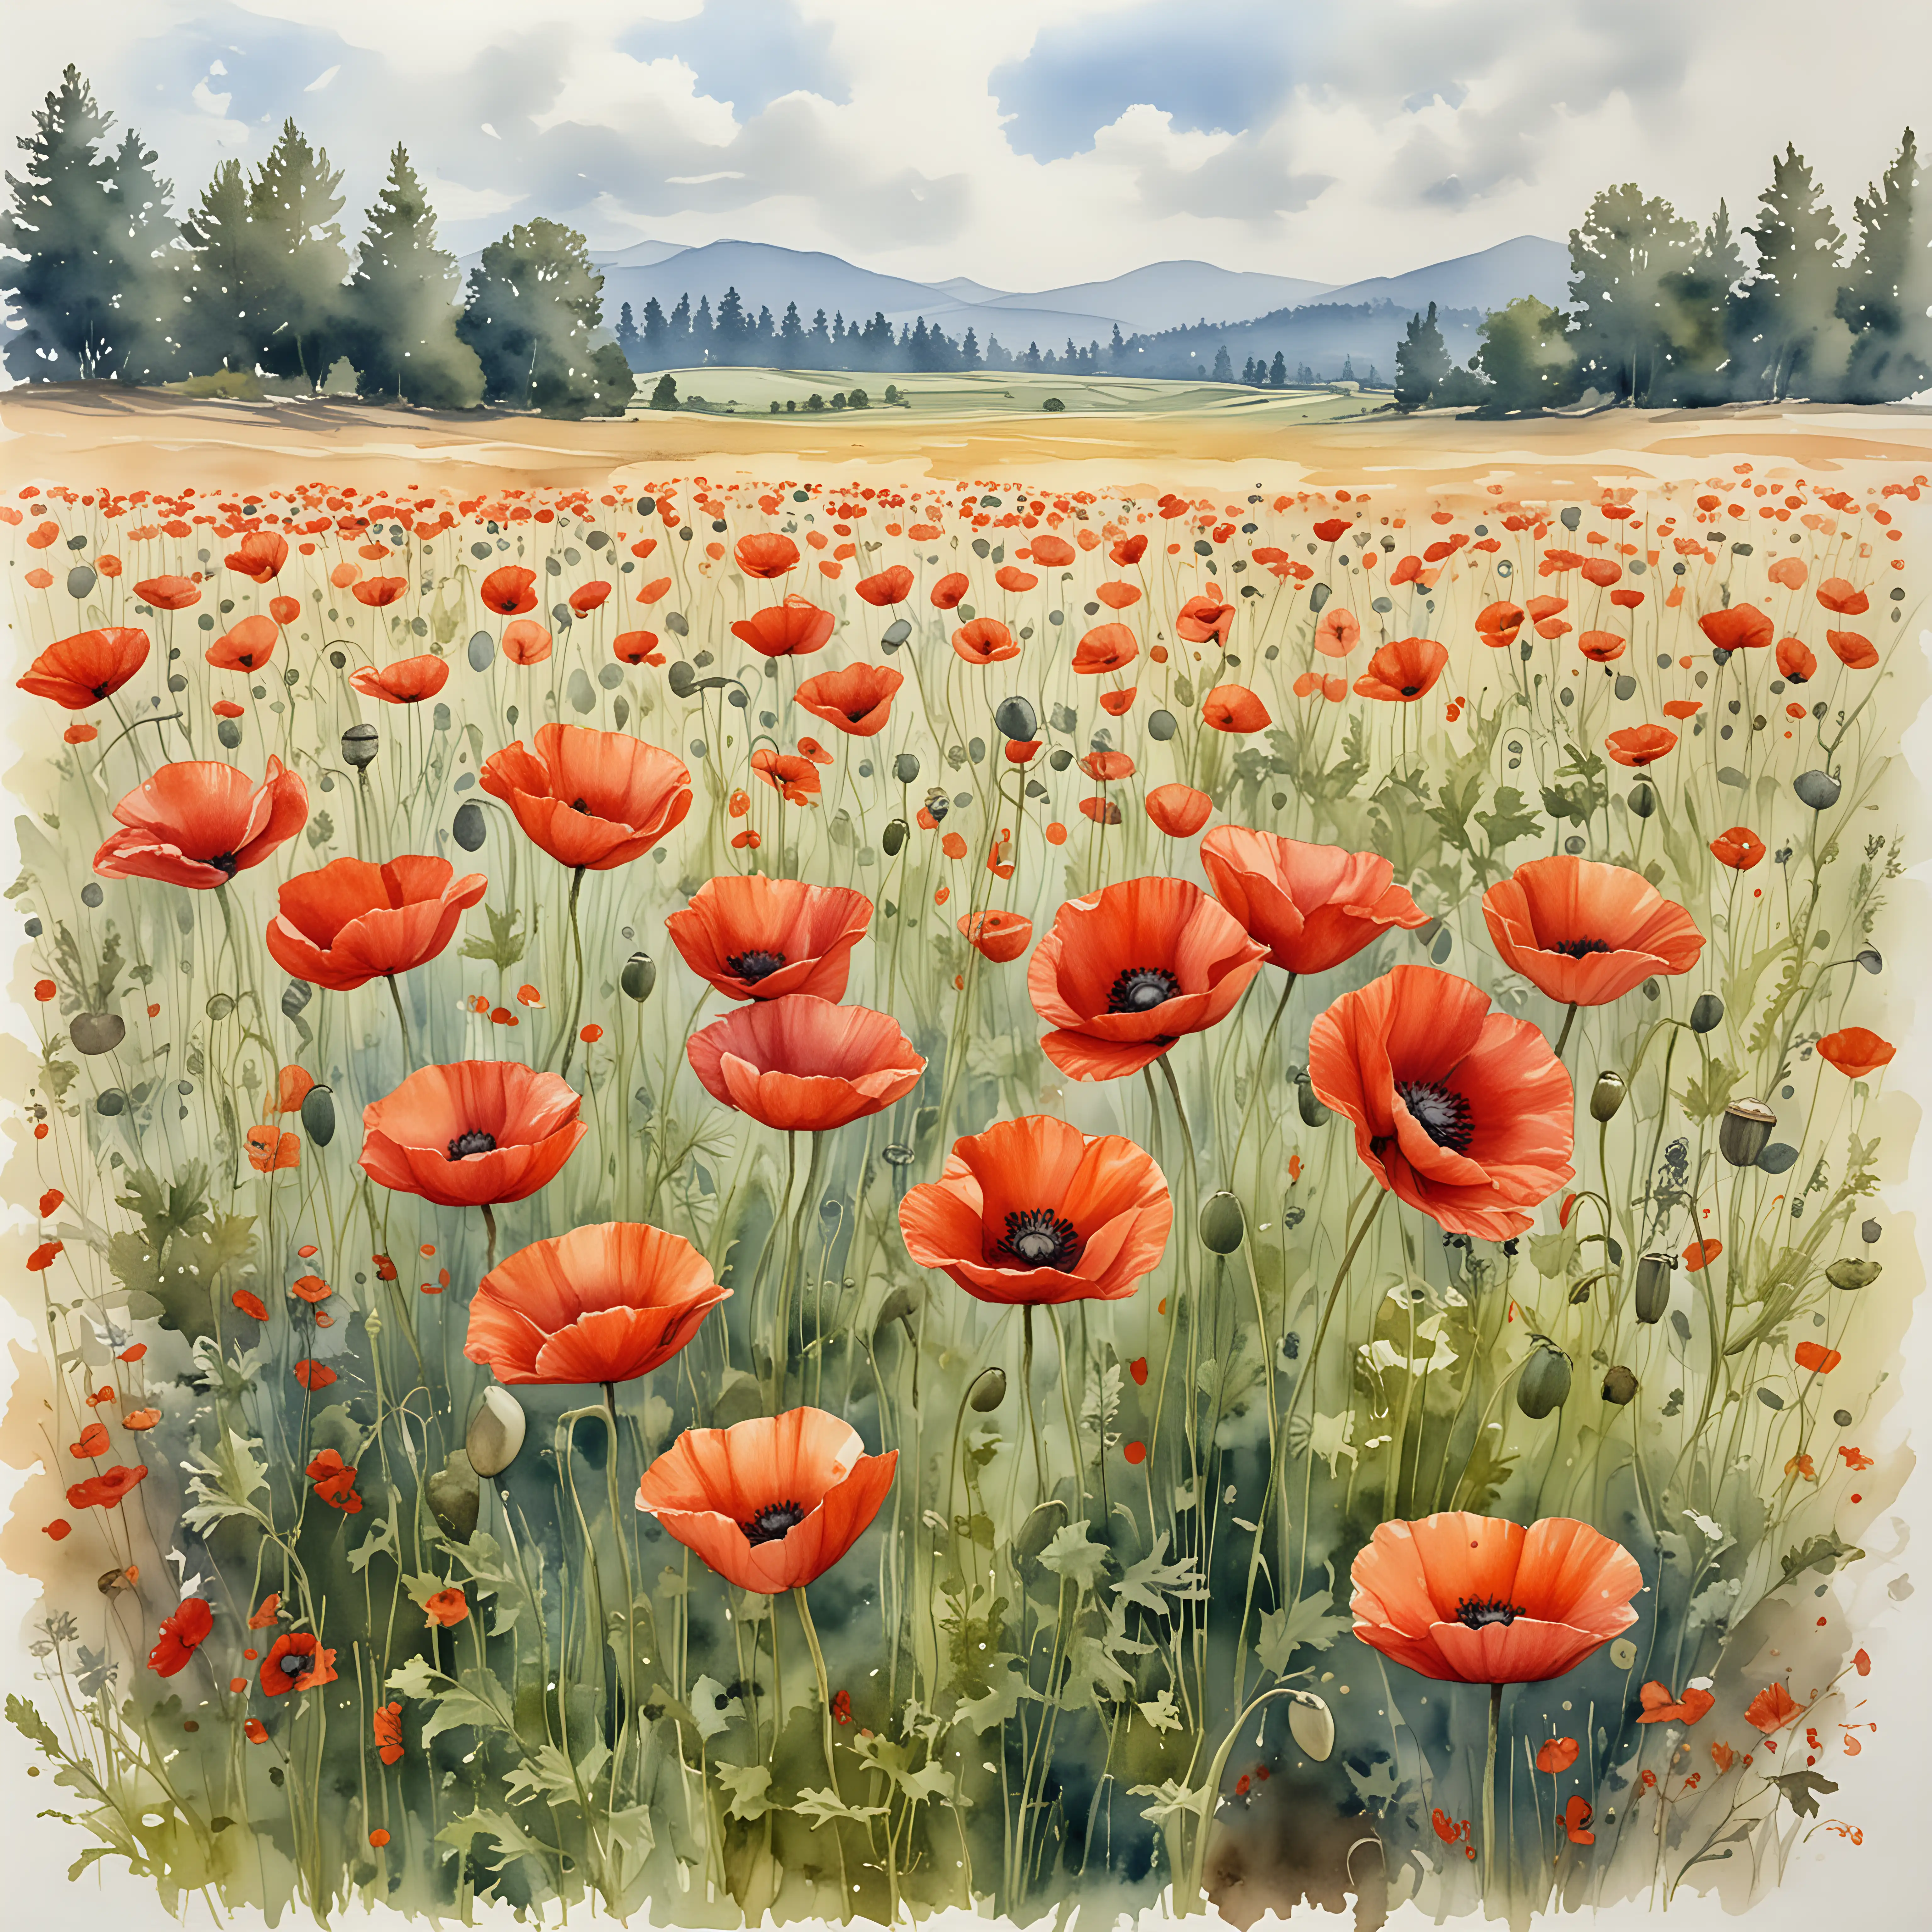 Vibrant Watercolor Painting of Poppies and Mushrooms in a Field